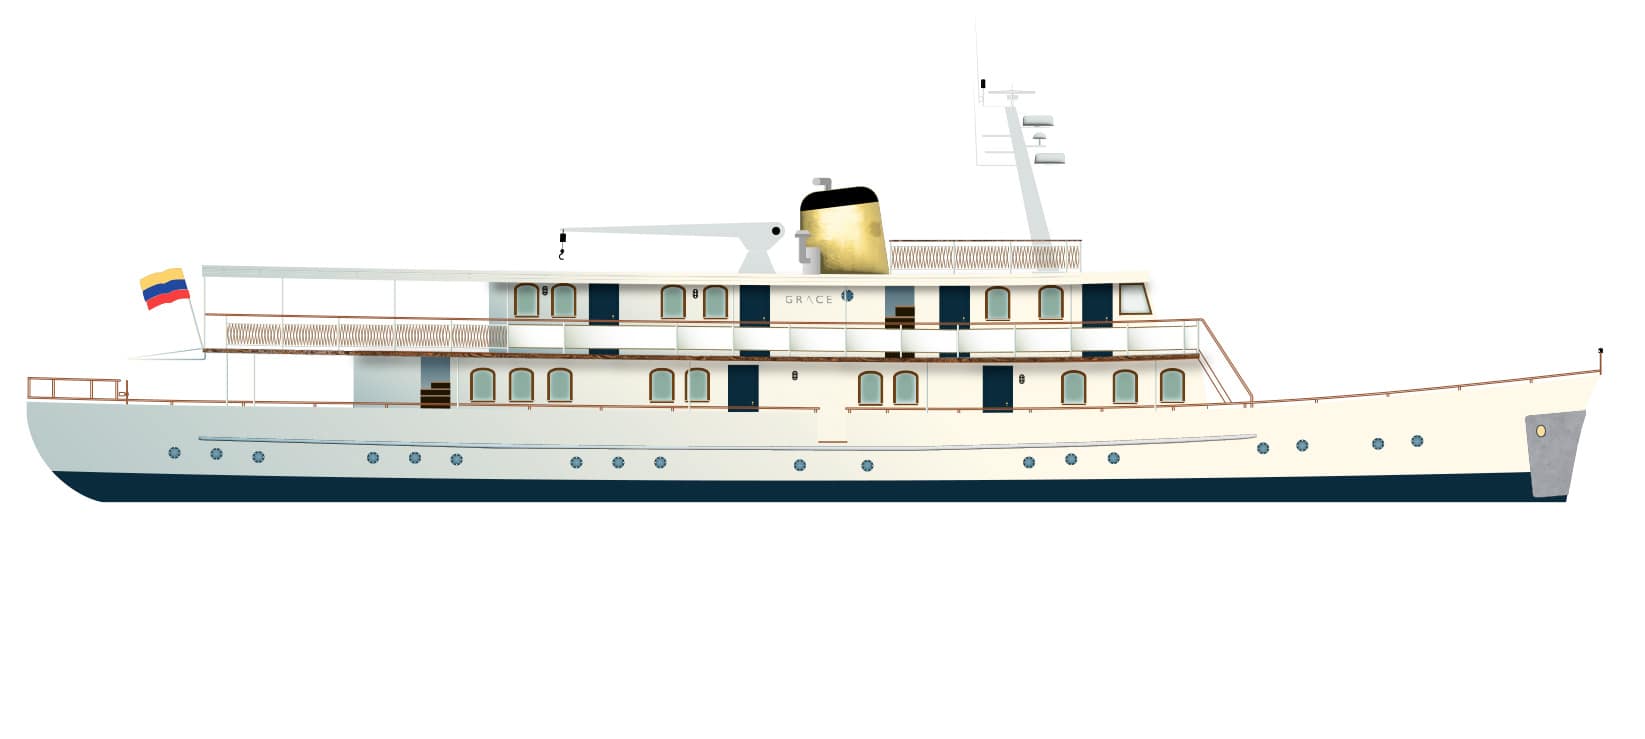 A side rendering of the Grace Yacht